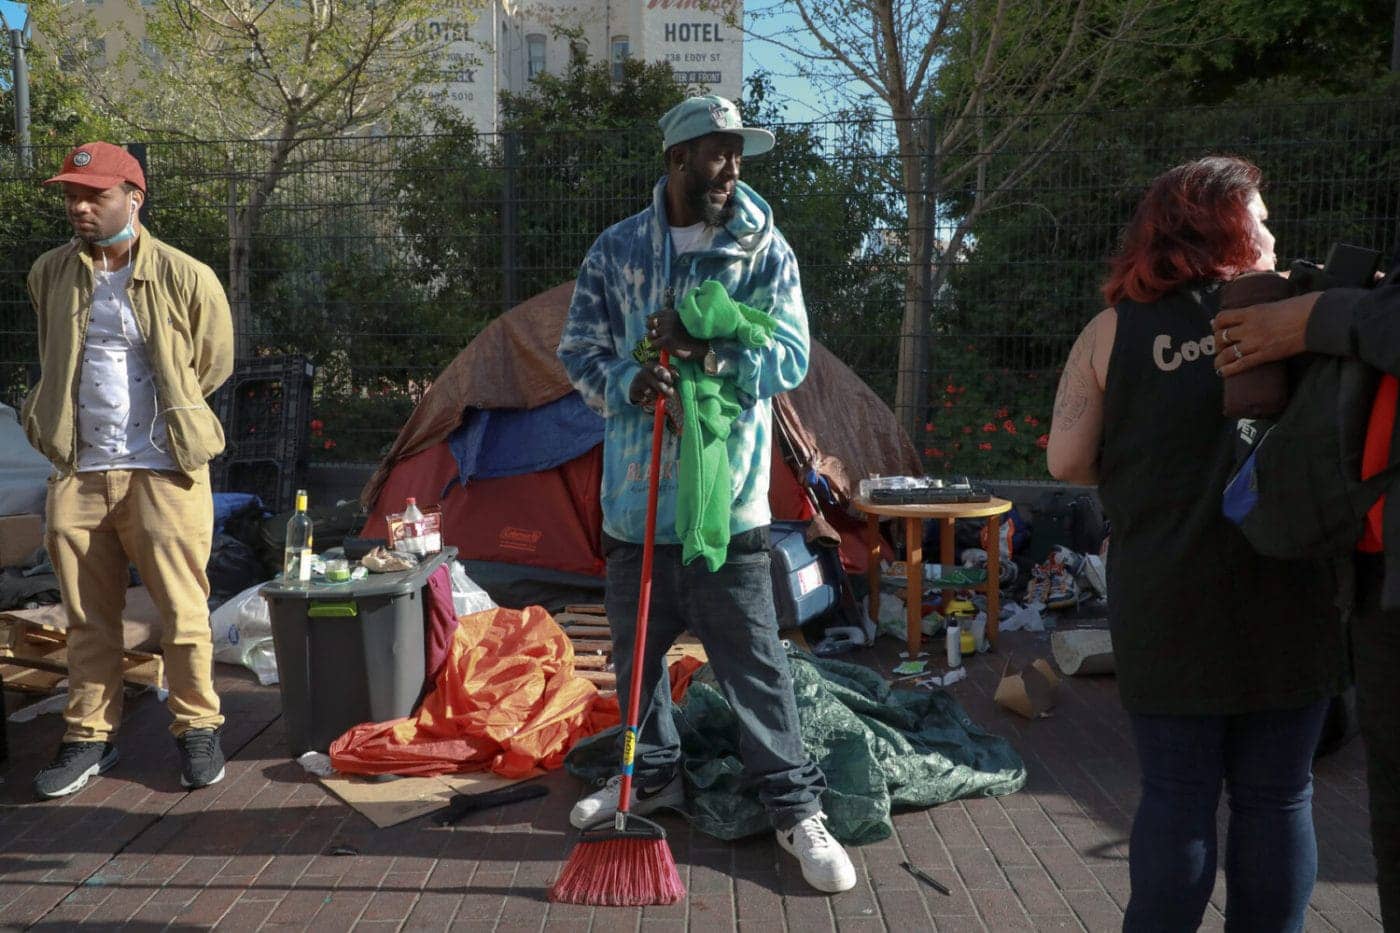 Tenderloin-unhoused-people-042621-by-Jim-Wilson-NYT-1400x933, The other pandemic, Local News & Views 